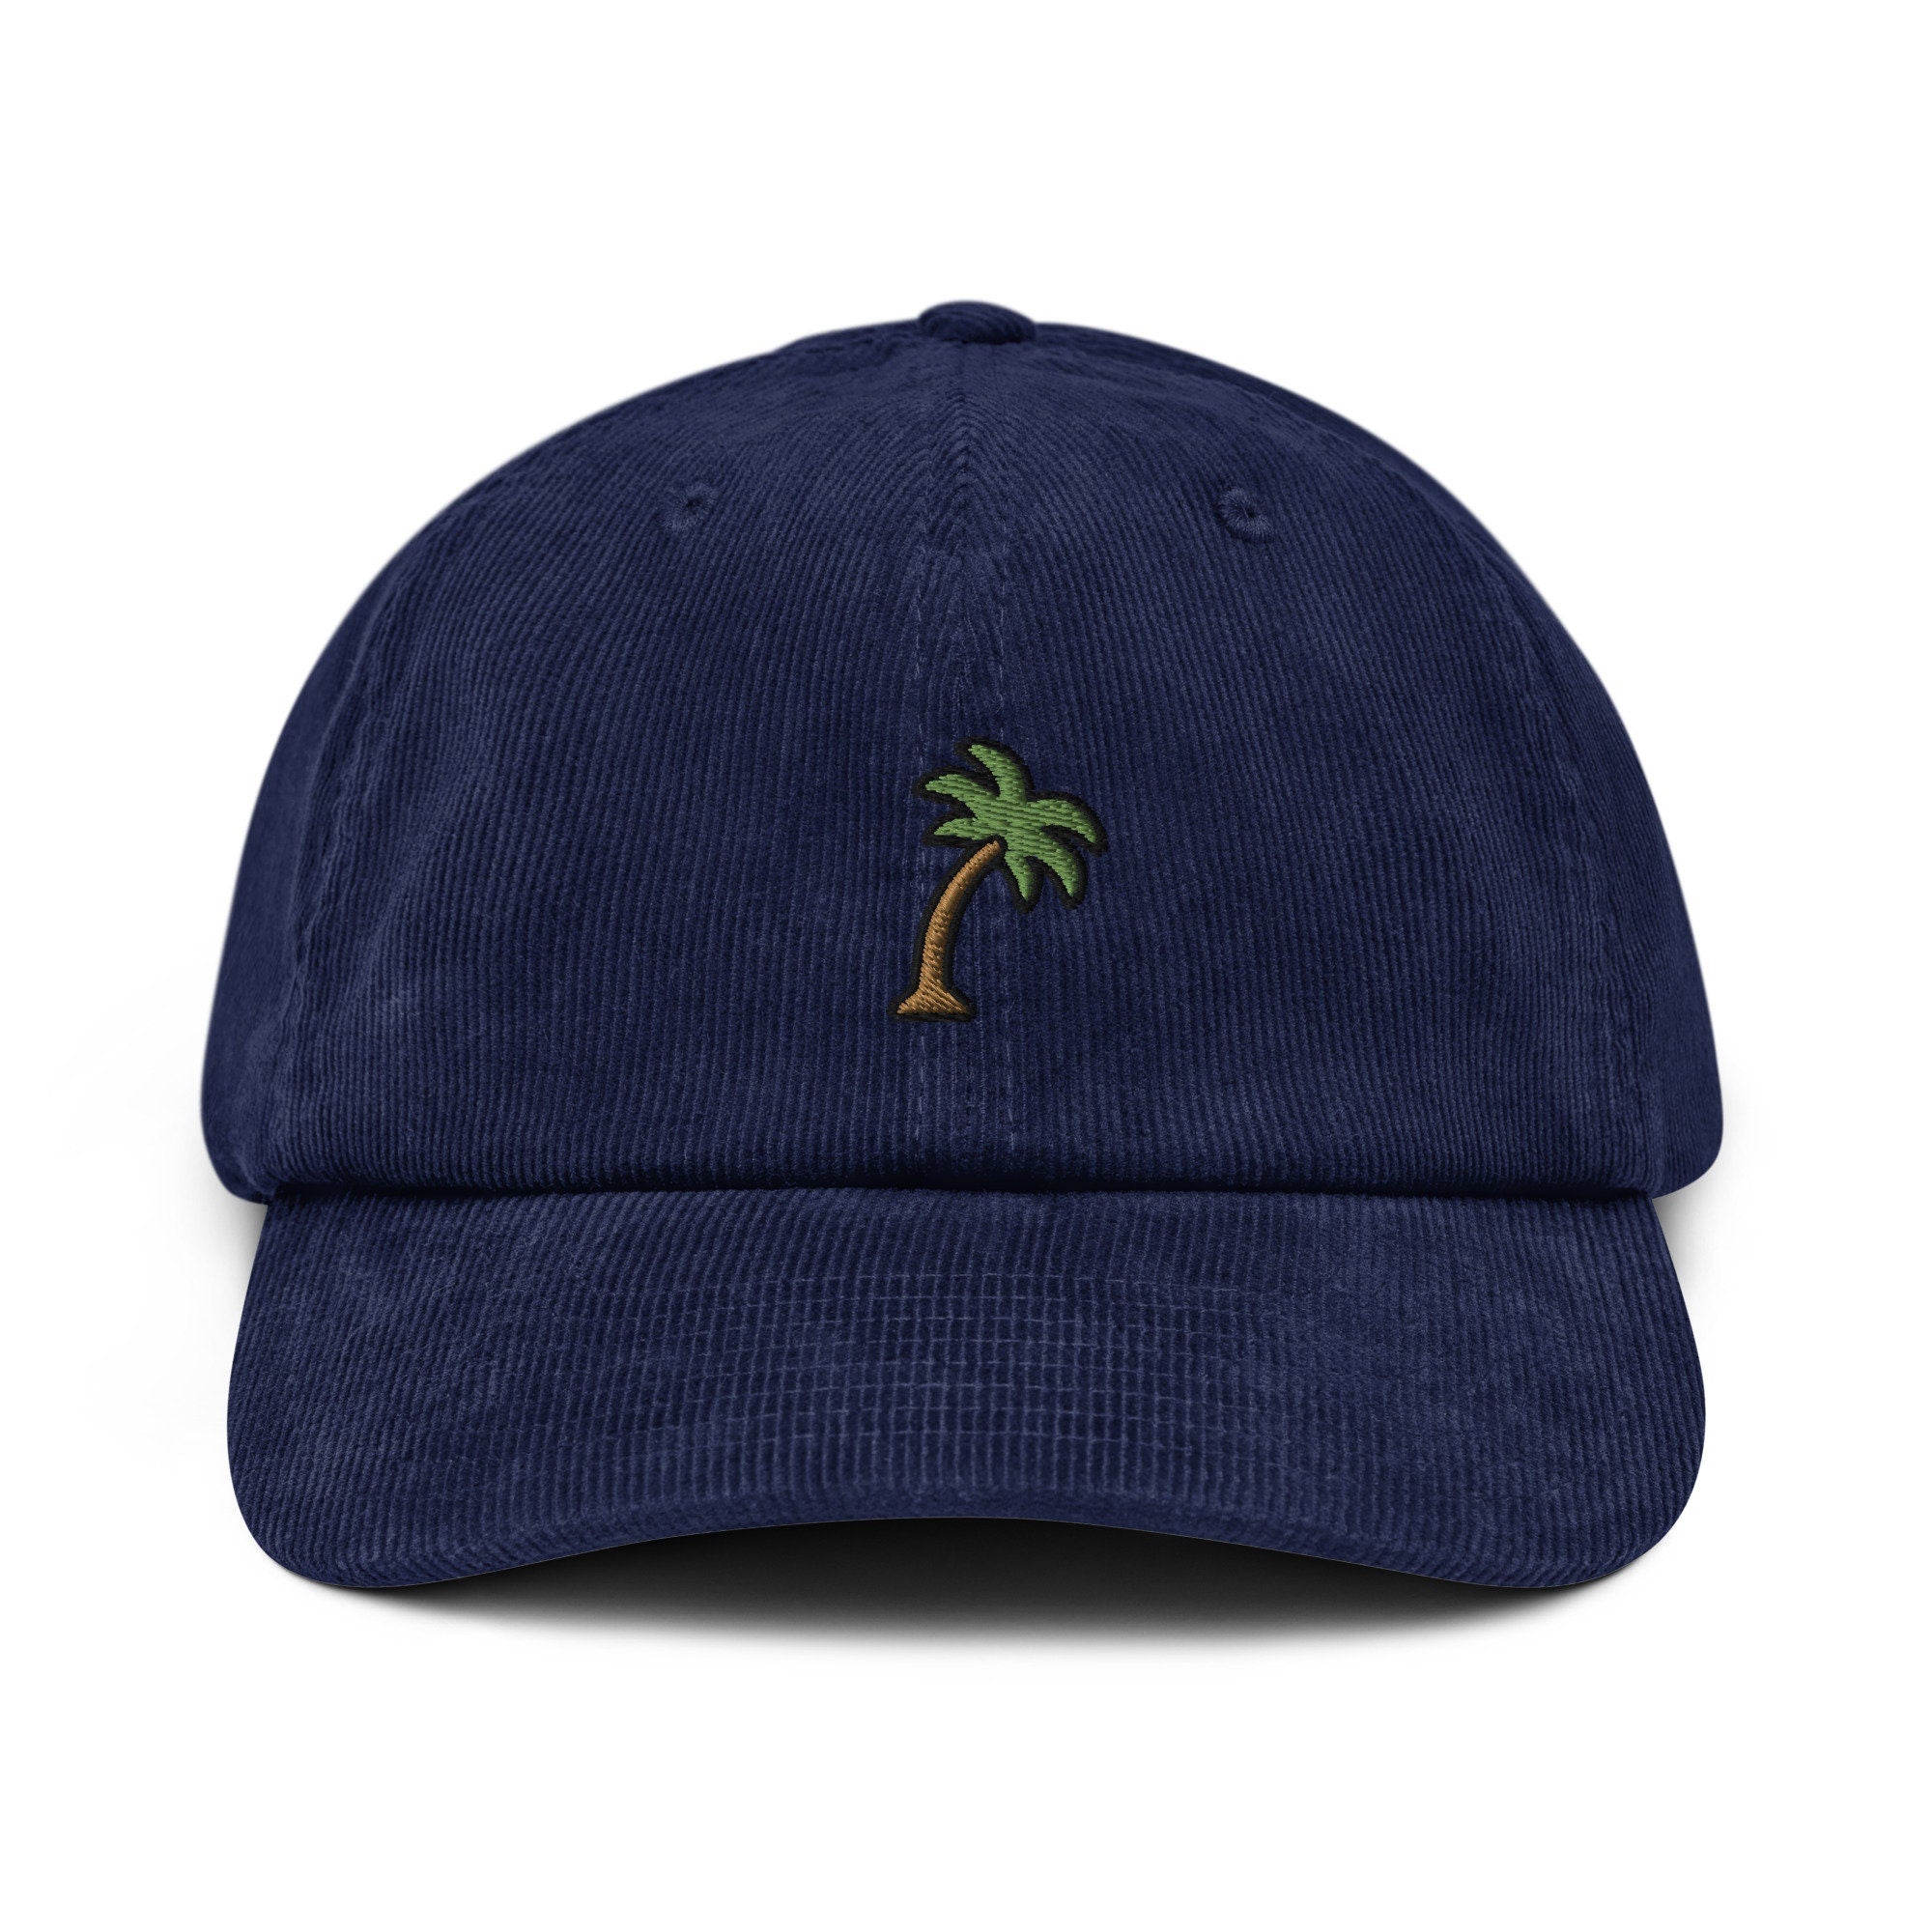 Palm Tree Corduroy Hat, Handmade Embroidered Corduroy Dad Cap - Multiple Colors